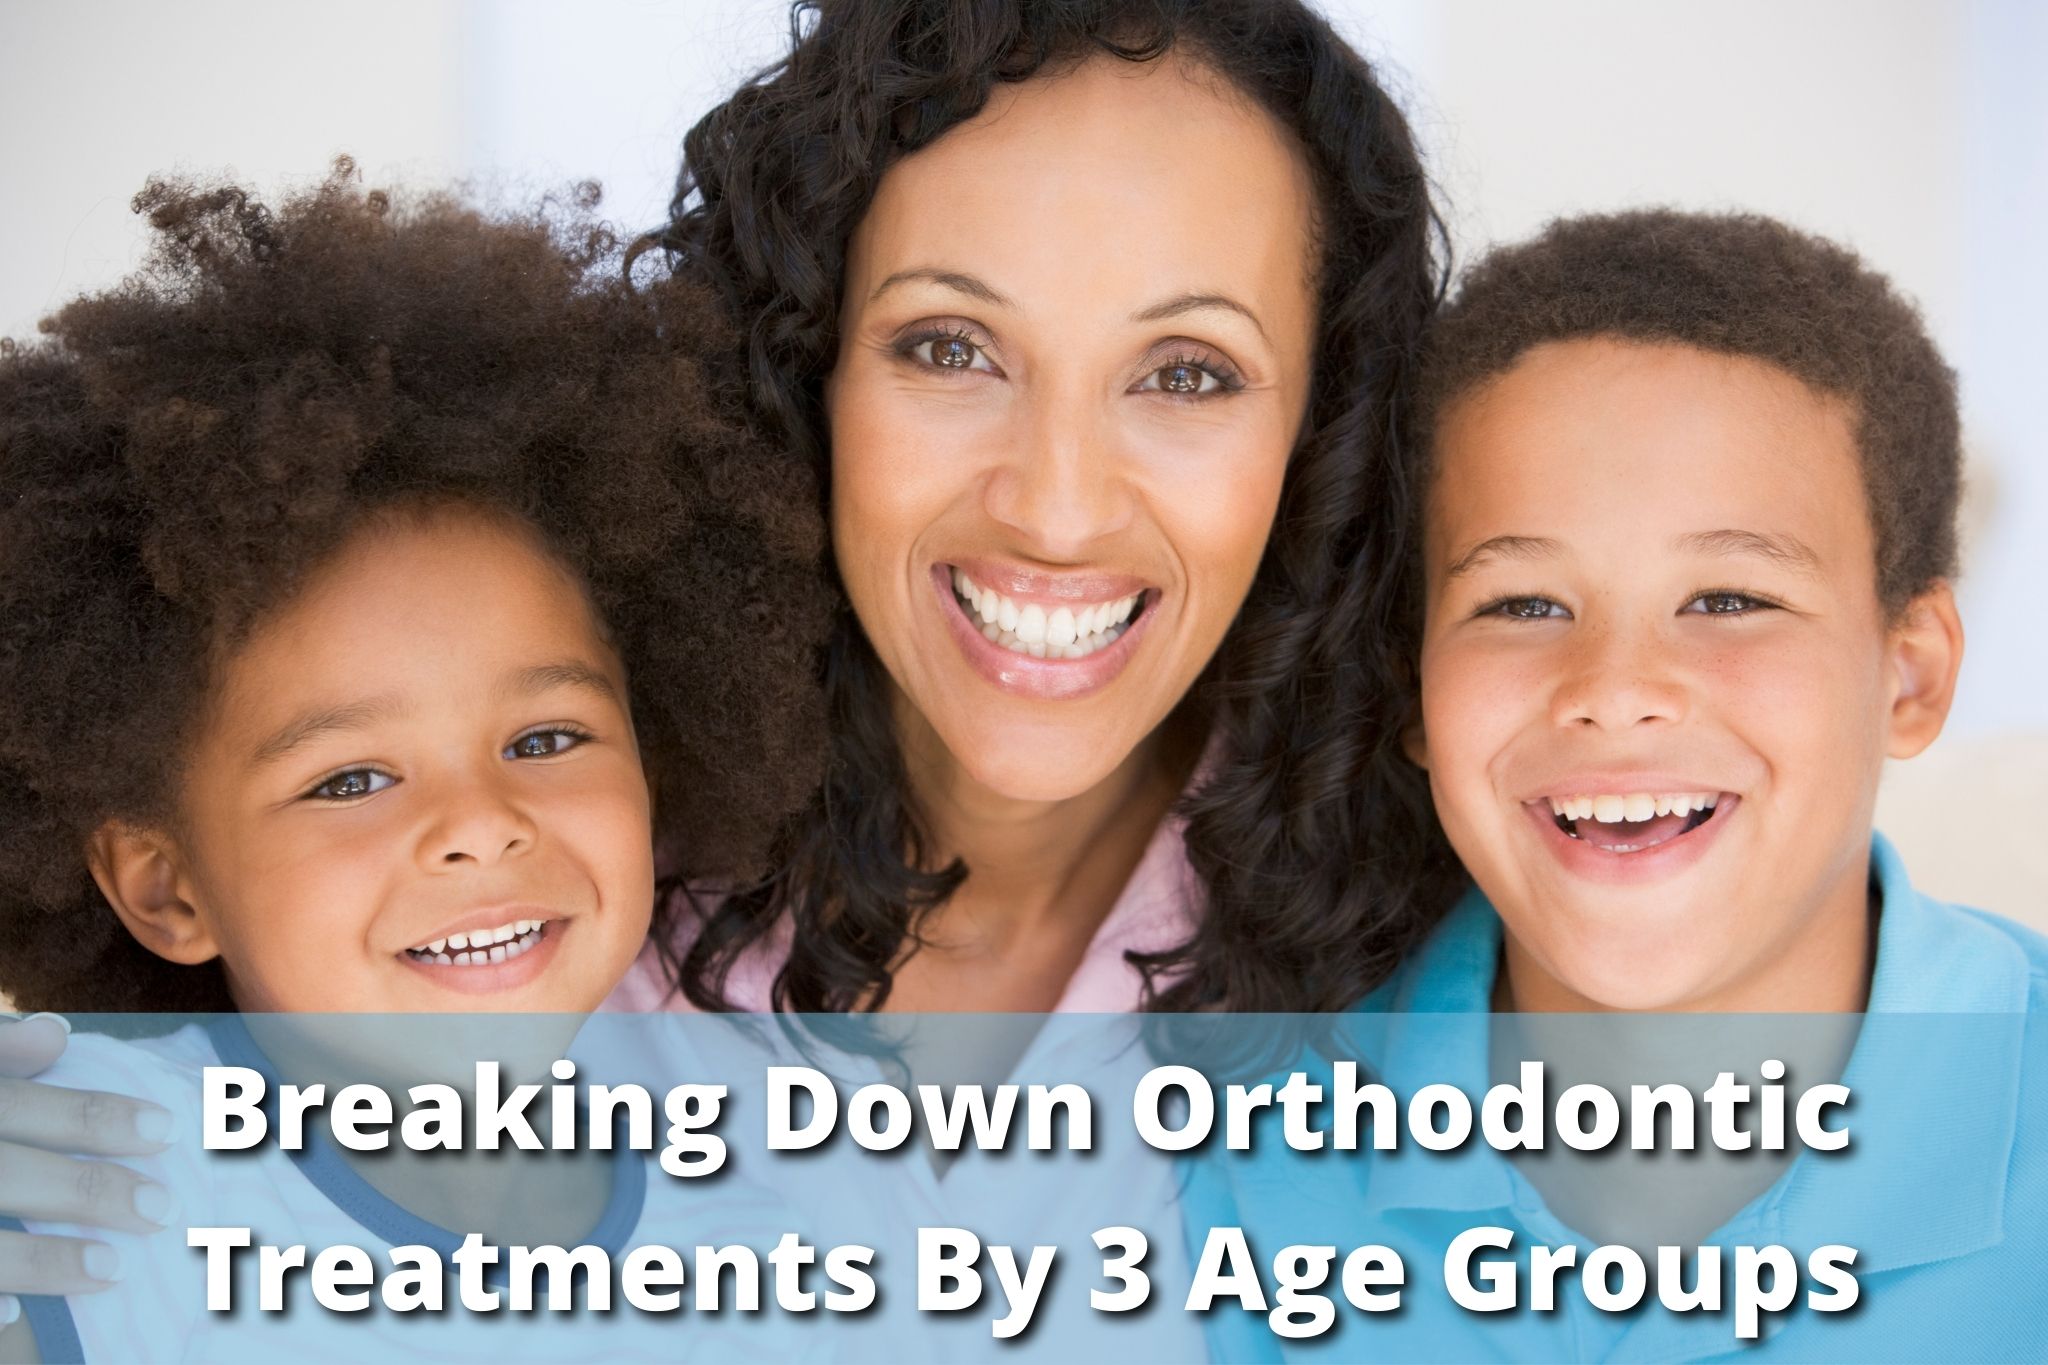 Orthodontics LA - Breaking Down Orthodontic Treatments By 3 Age Groups